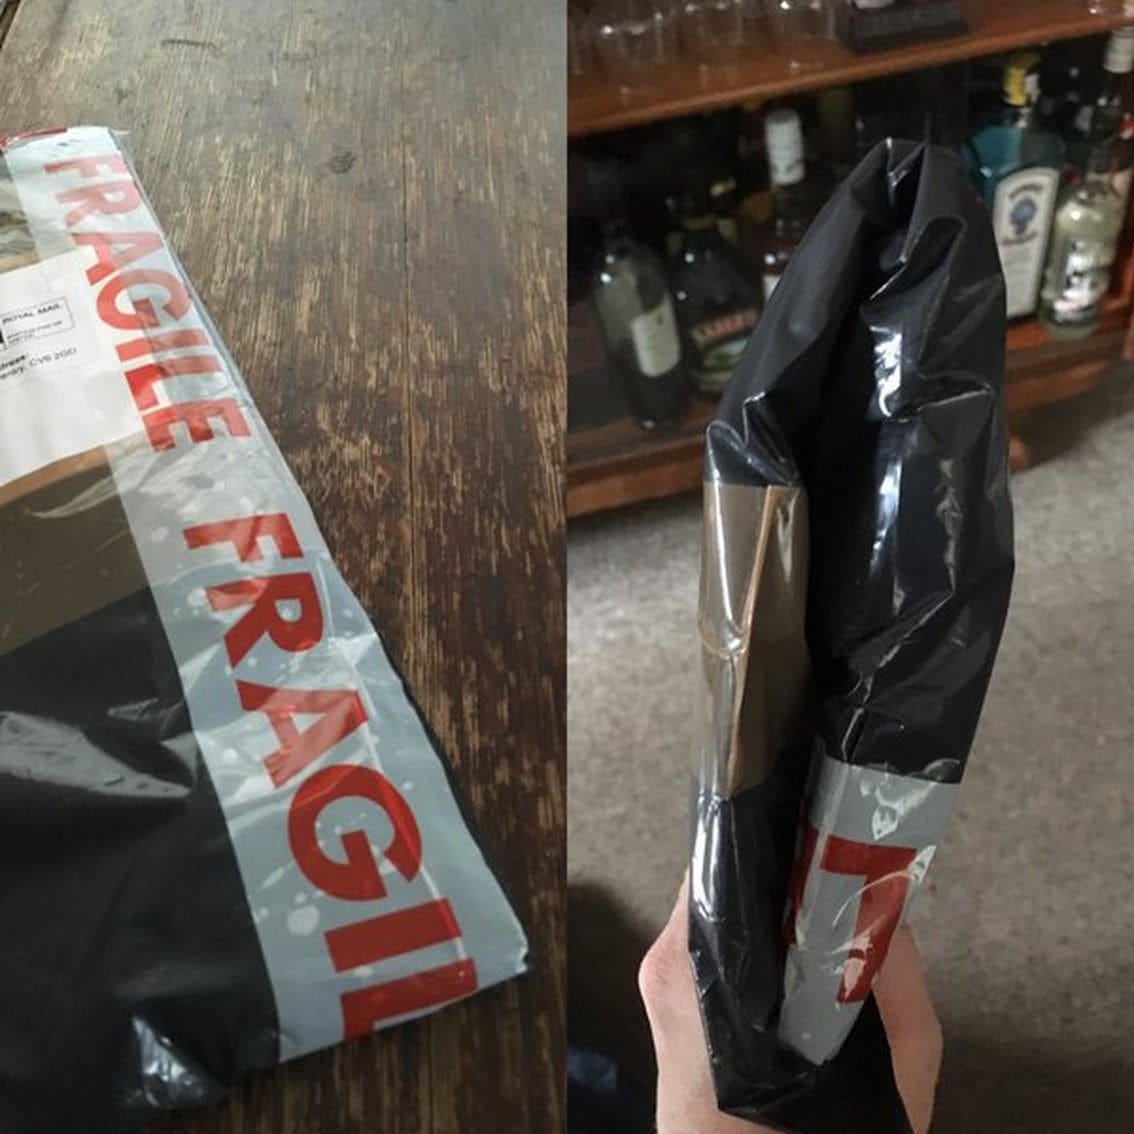 A UK postman delivered a vinyl record through a letterbox... by folding it in half!